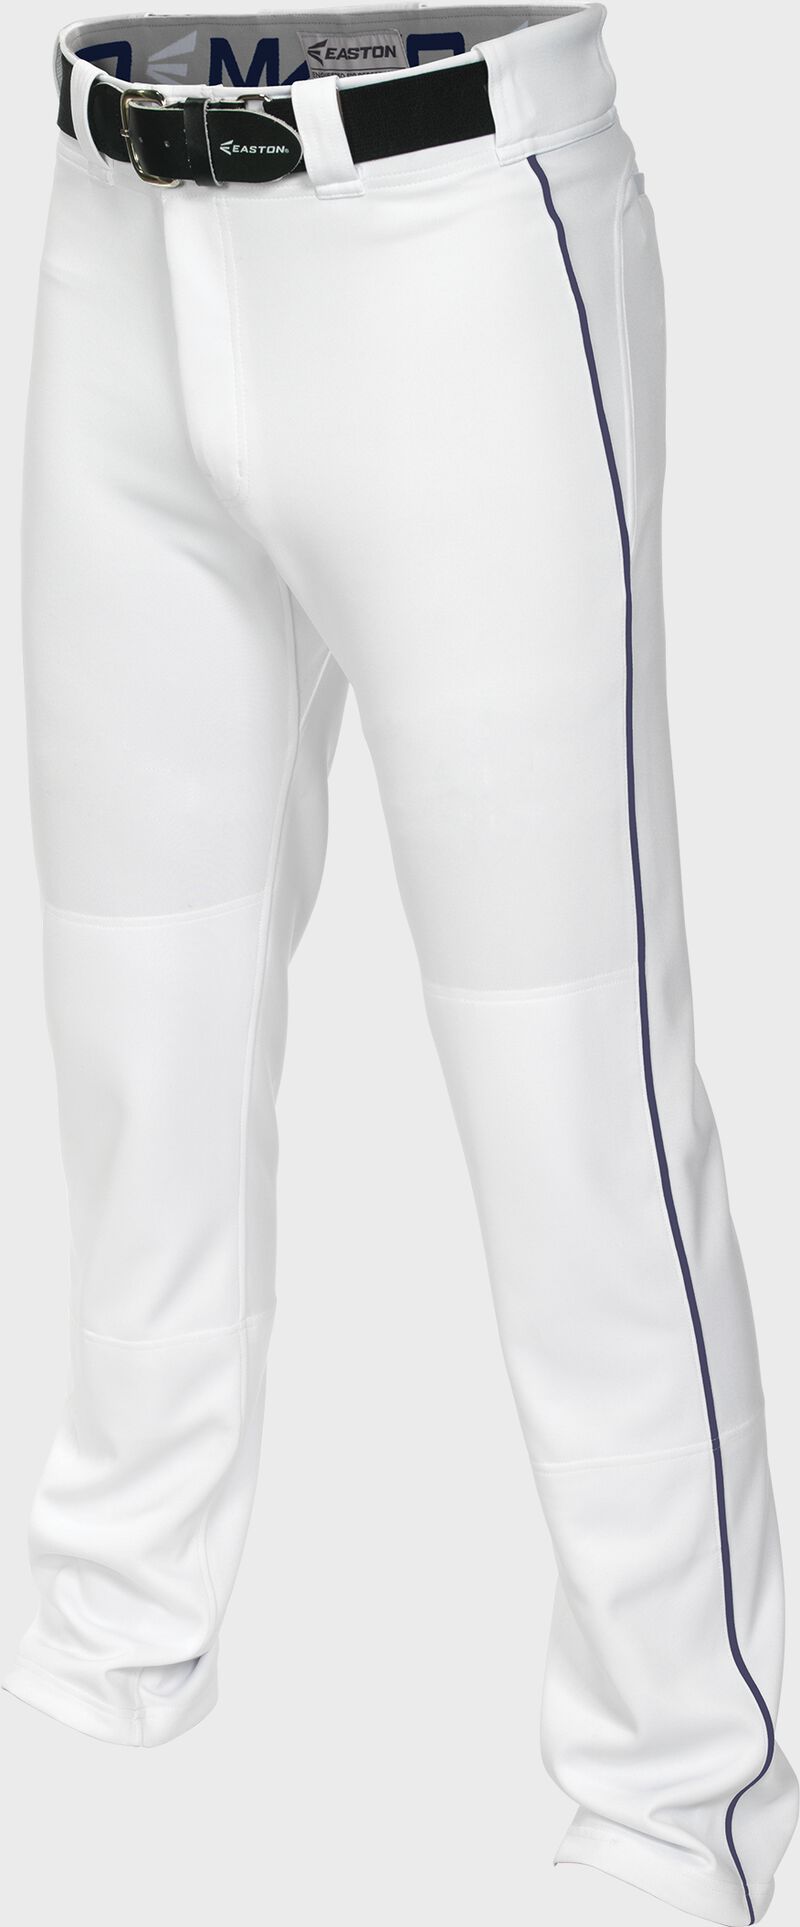 Mako 2 Pant Youth Piped WHITE/NAVY  XL